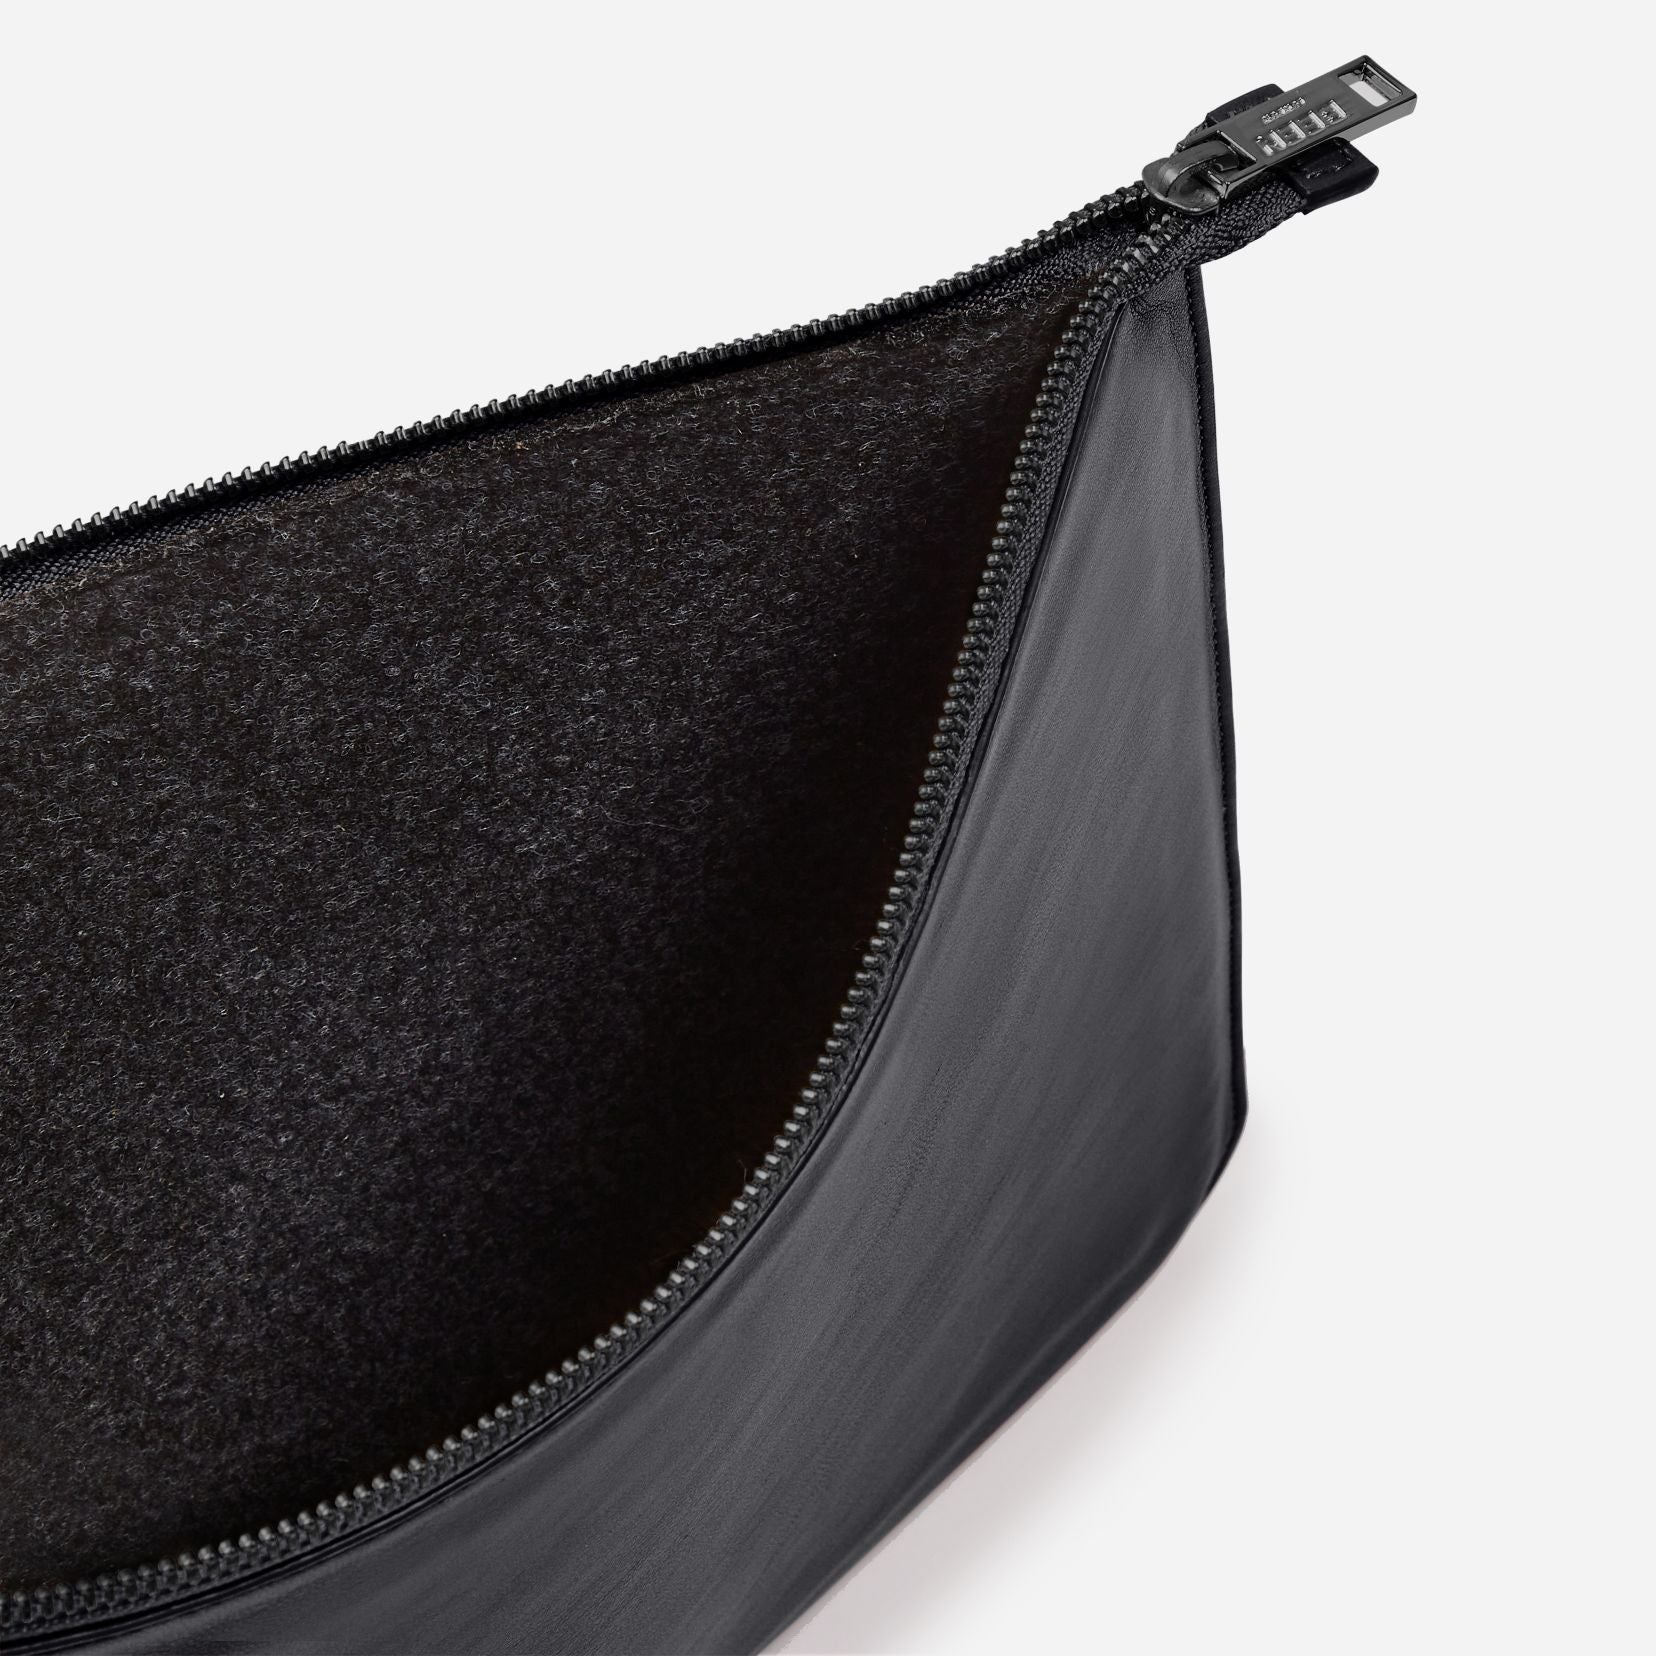 Martello Laptop Case- Large pouch in Black Onyx interior